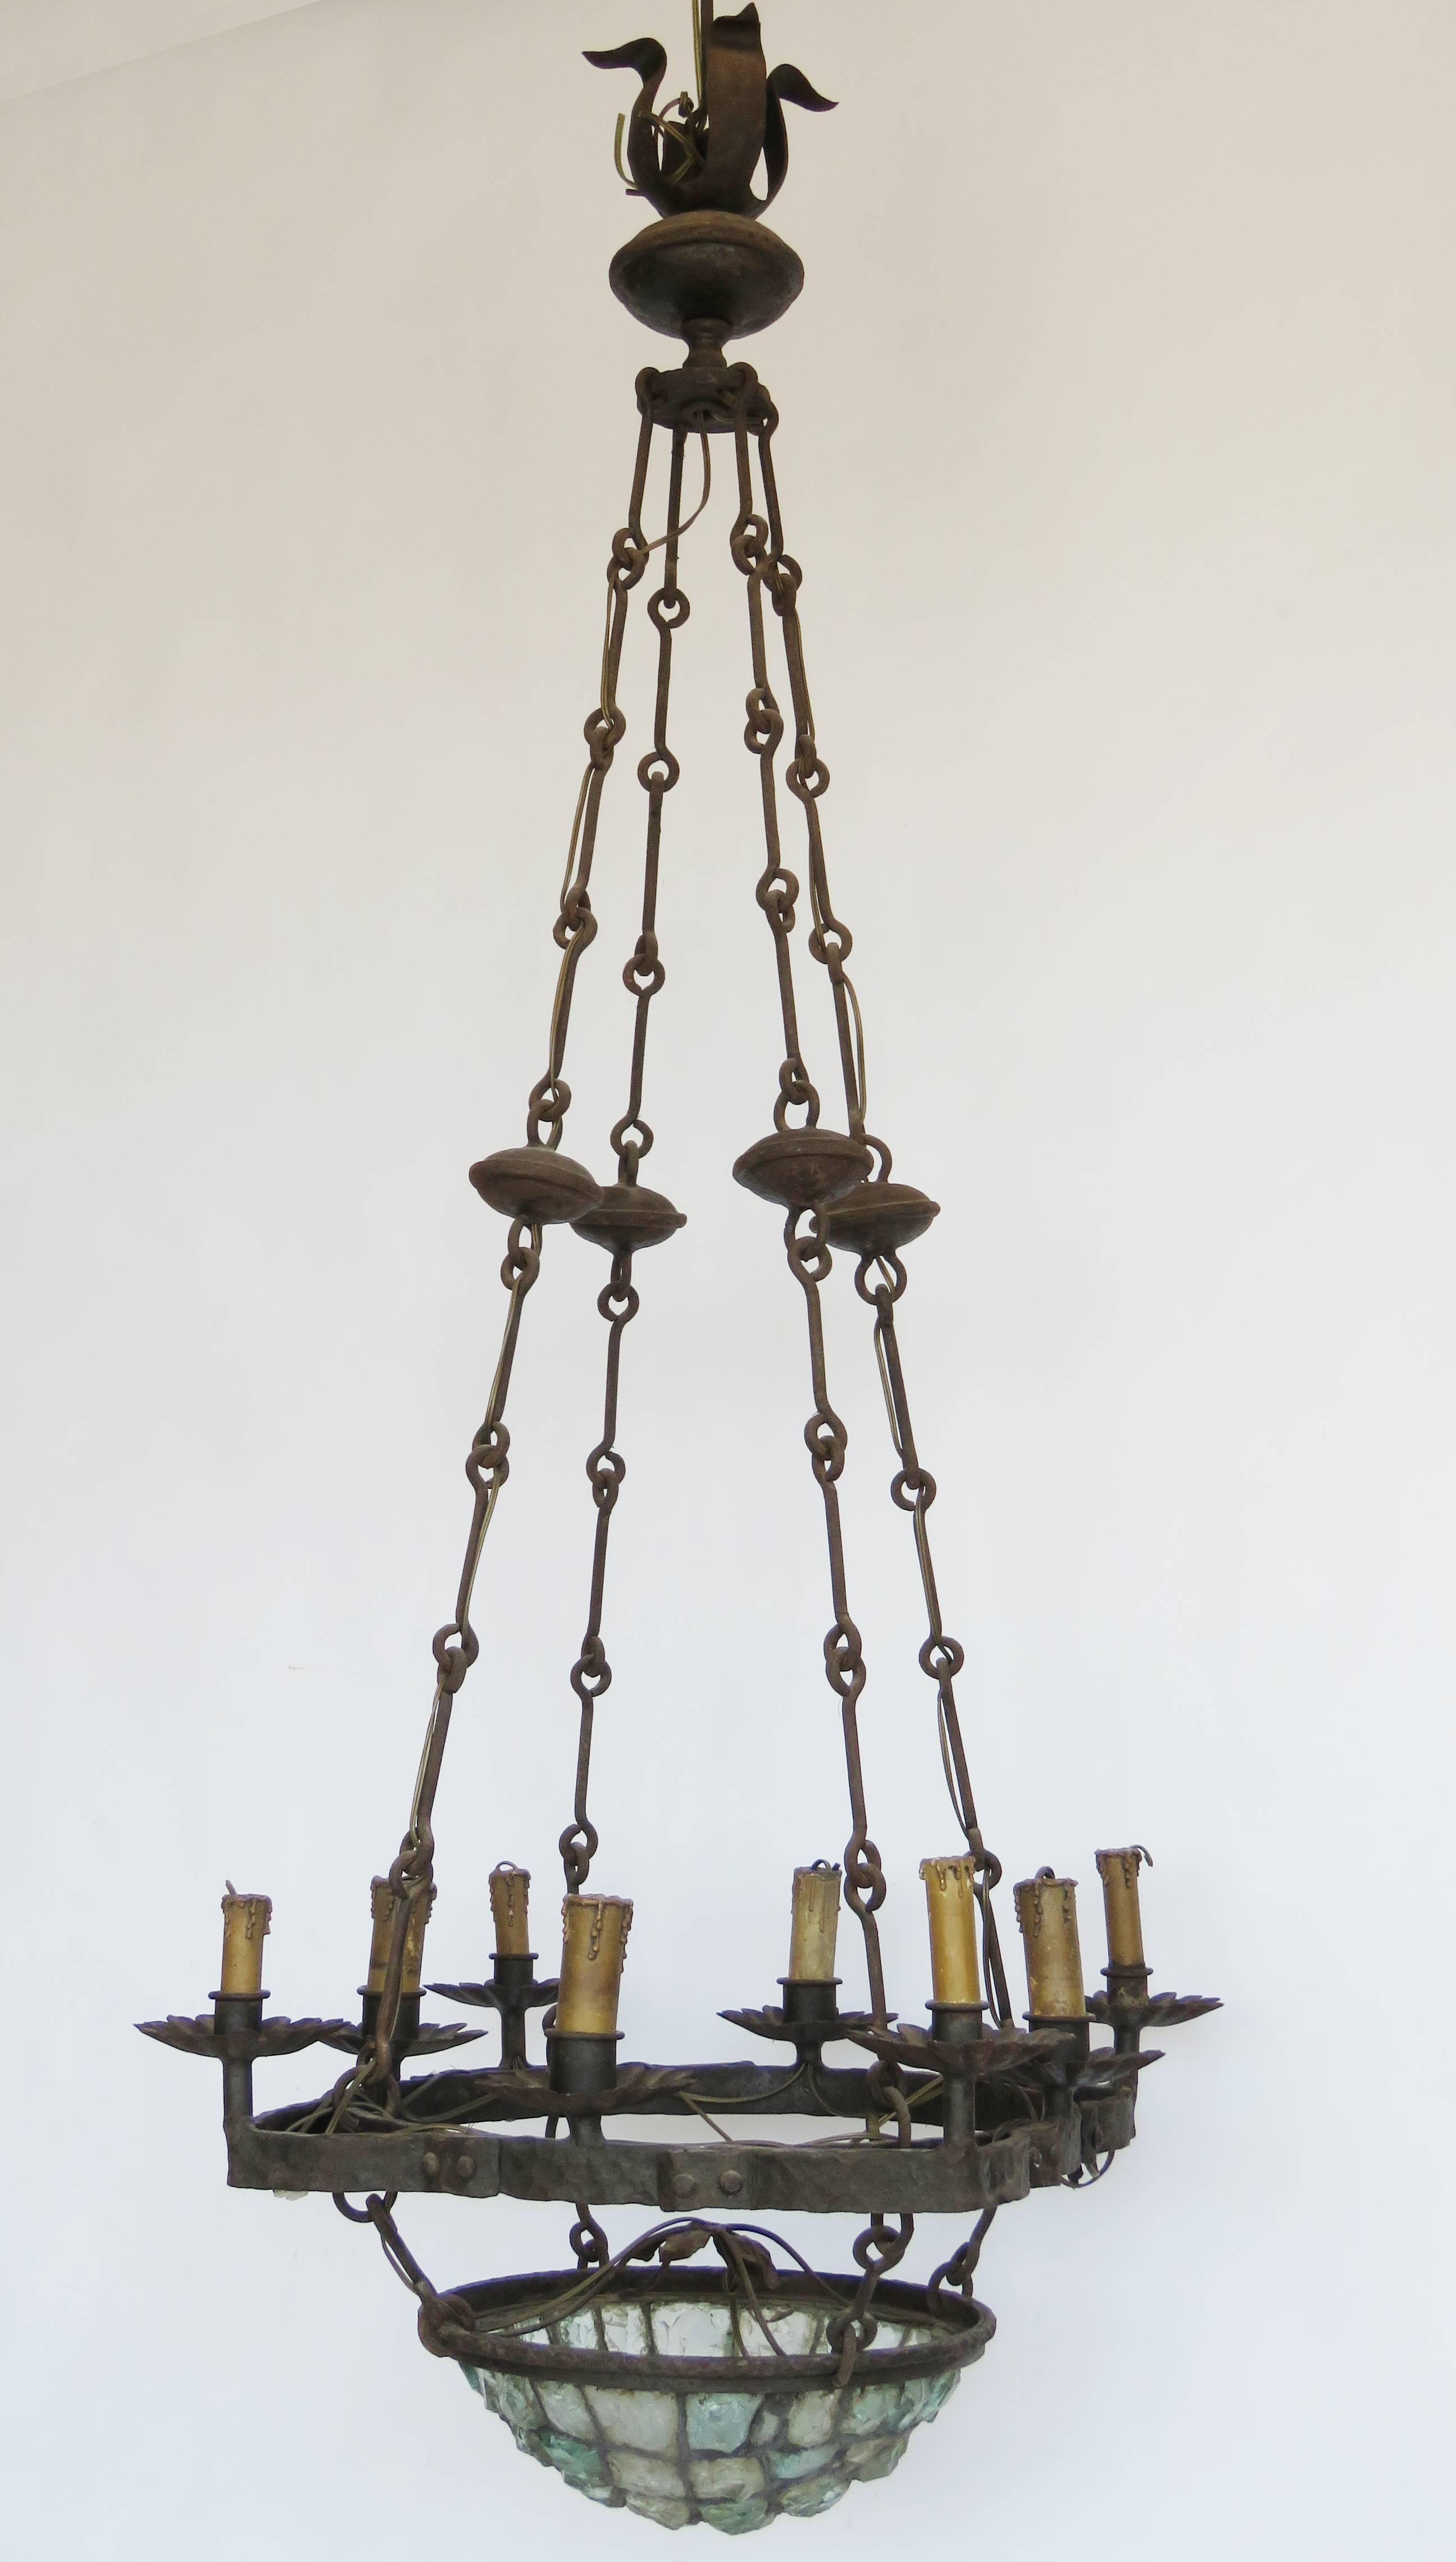 Large hand-forged iron chandelier suspended on rod and ring irons, eight candle lights on an unusual shape base a further light in the rock crystal hanging basket.

Antoni Gaudi style design.